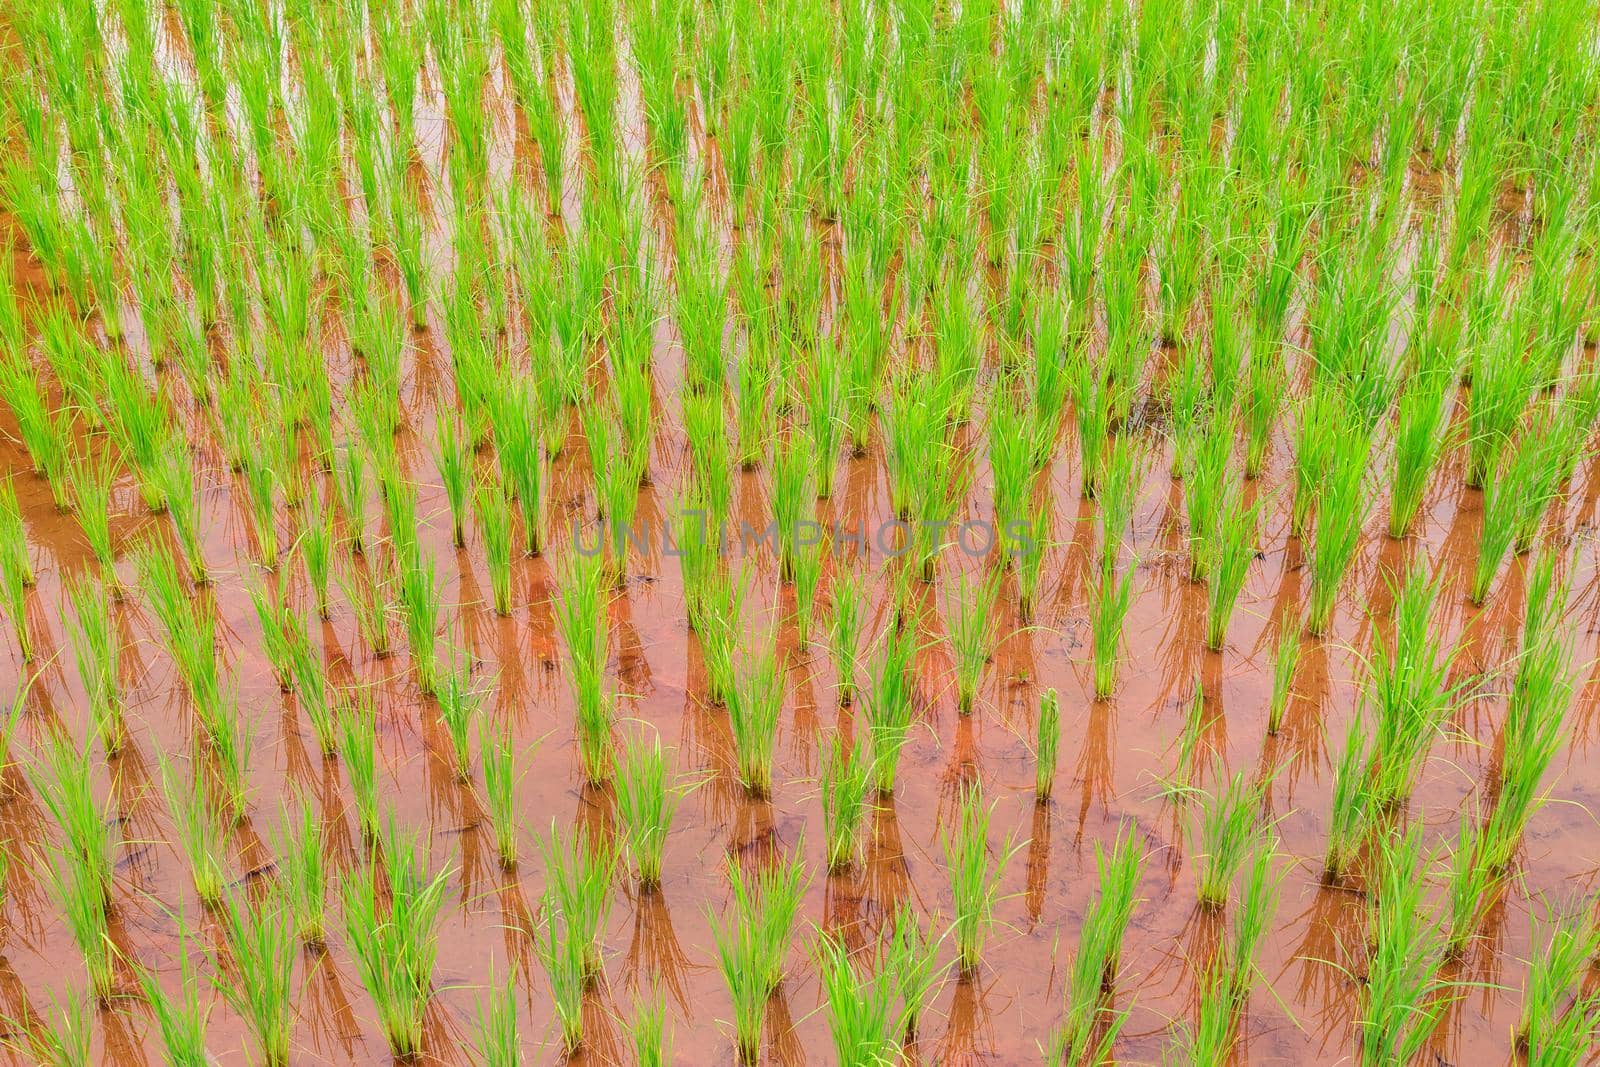 View of young rice Grown in the rainy season